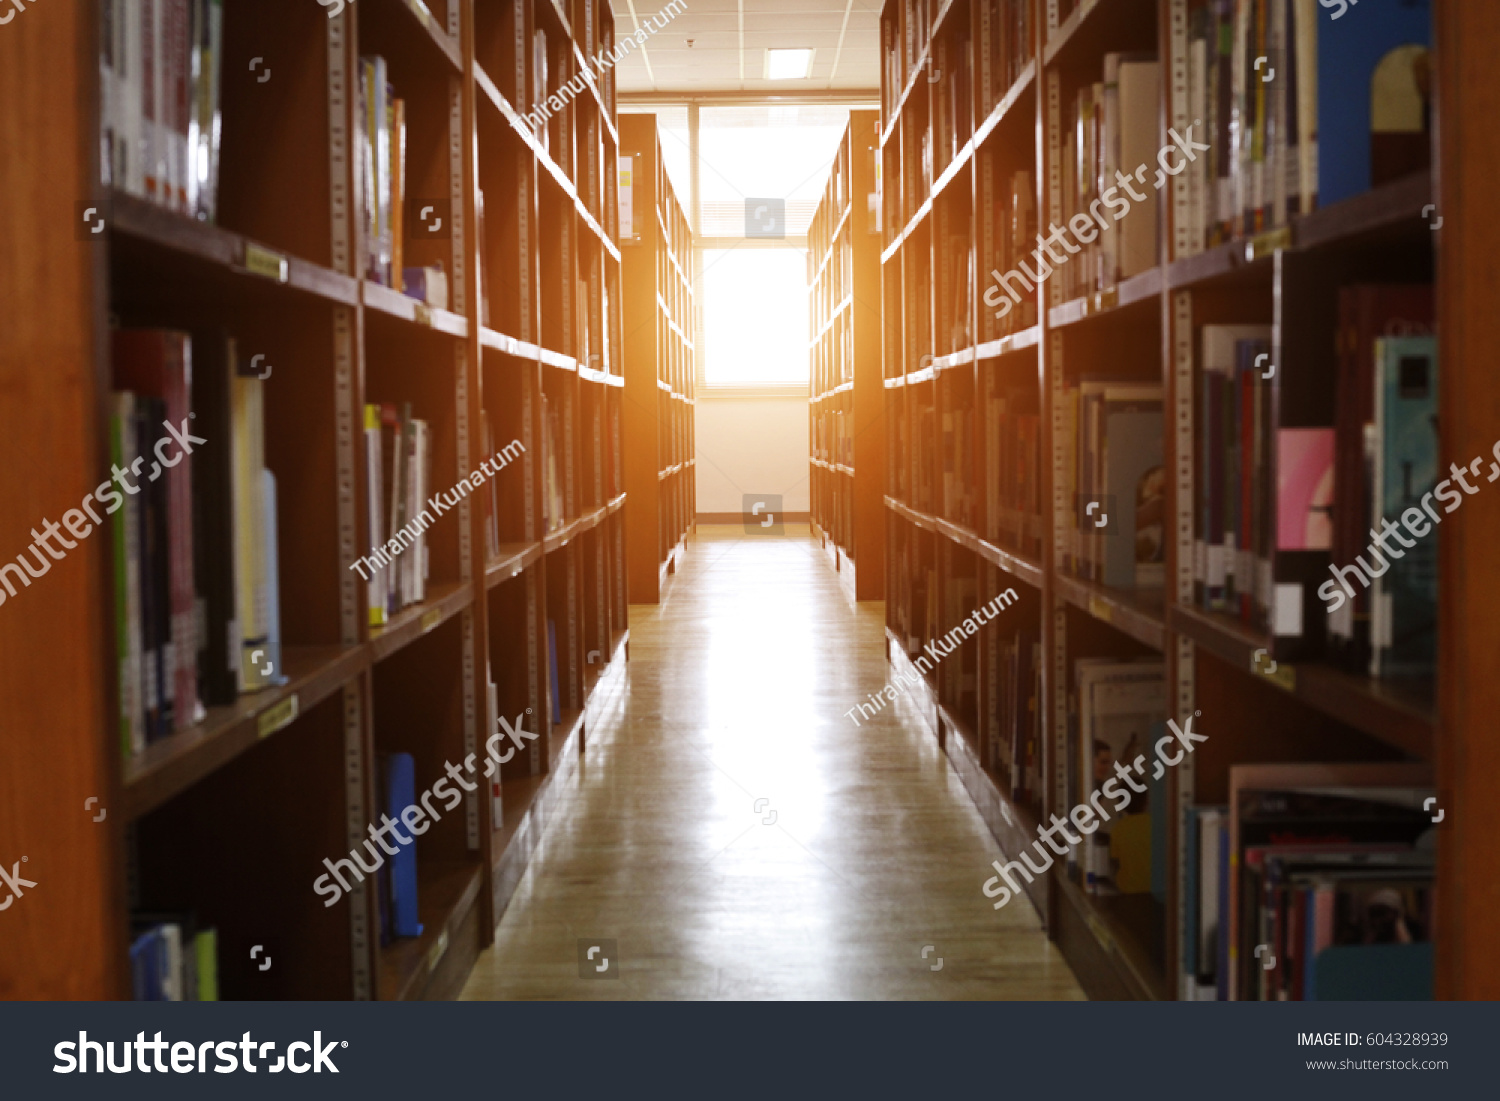 Blur image of picture library background. Library resources, including vast knowledge and sun light. School classroom in blur background. blurry view of elementary class room. #604328939